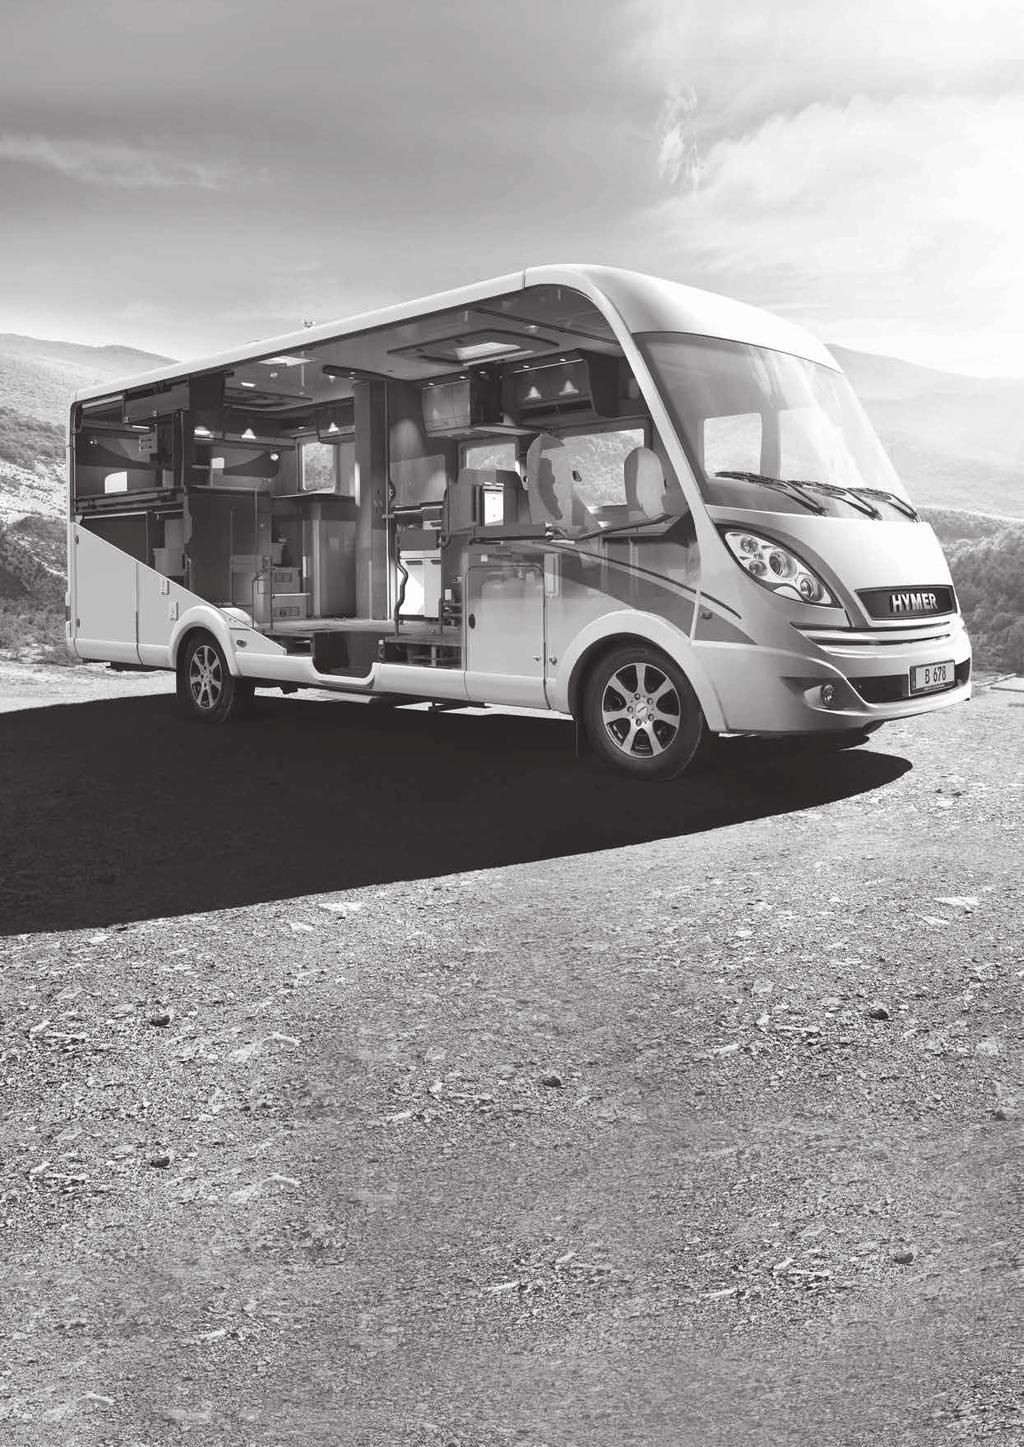 Dear Motorhome Owner, Live out wanderlust and a sense of home simultaneously. Can this be possible?